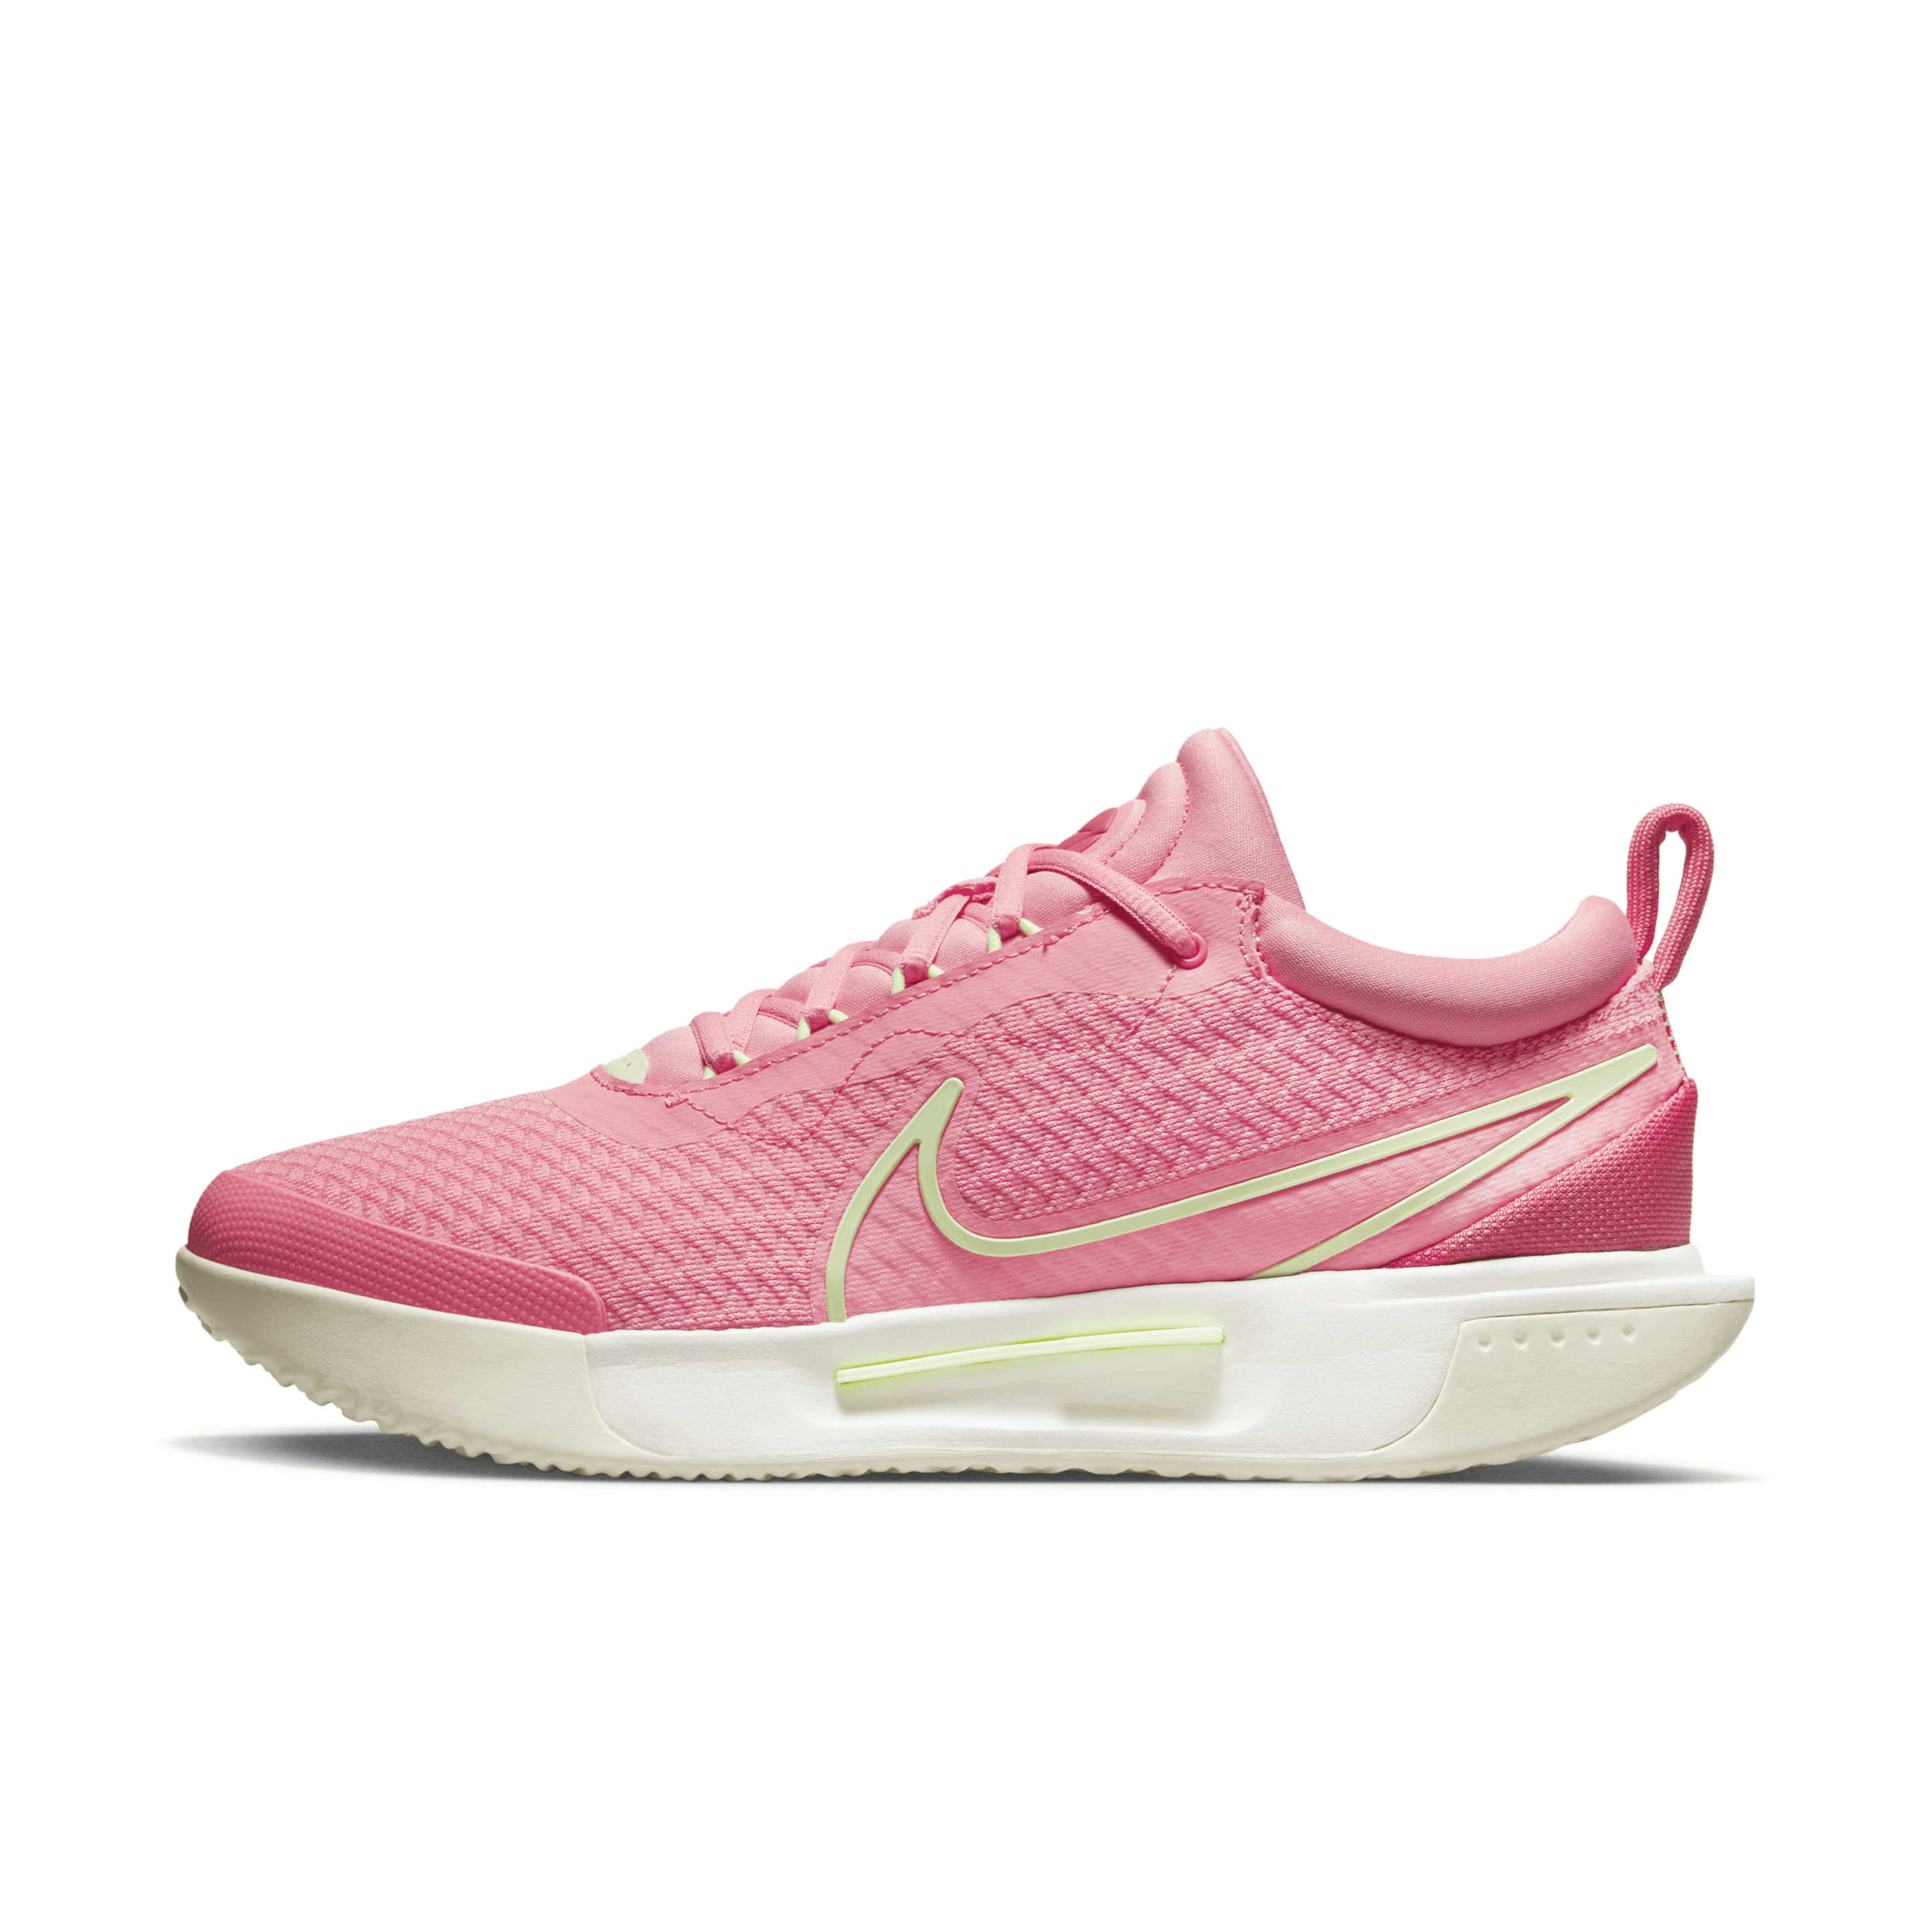 Nike Women's Court Air Zoom Pro Hard Court Tennis Shoes In Pink